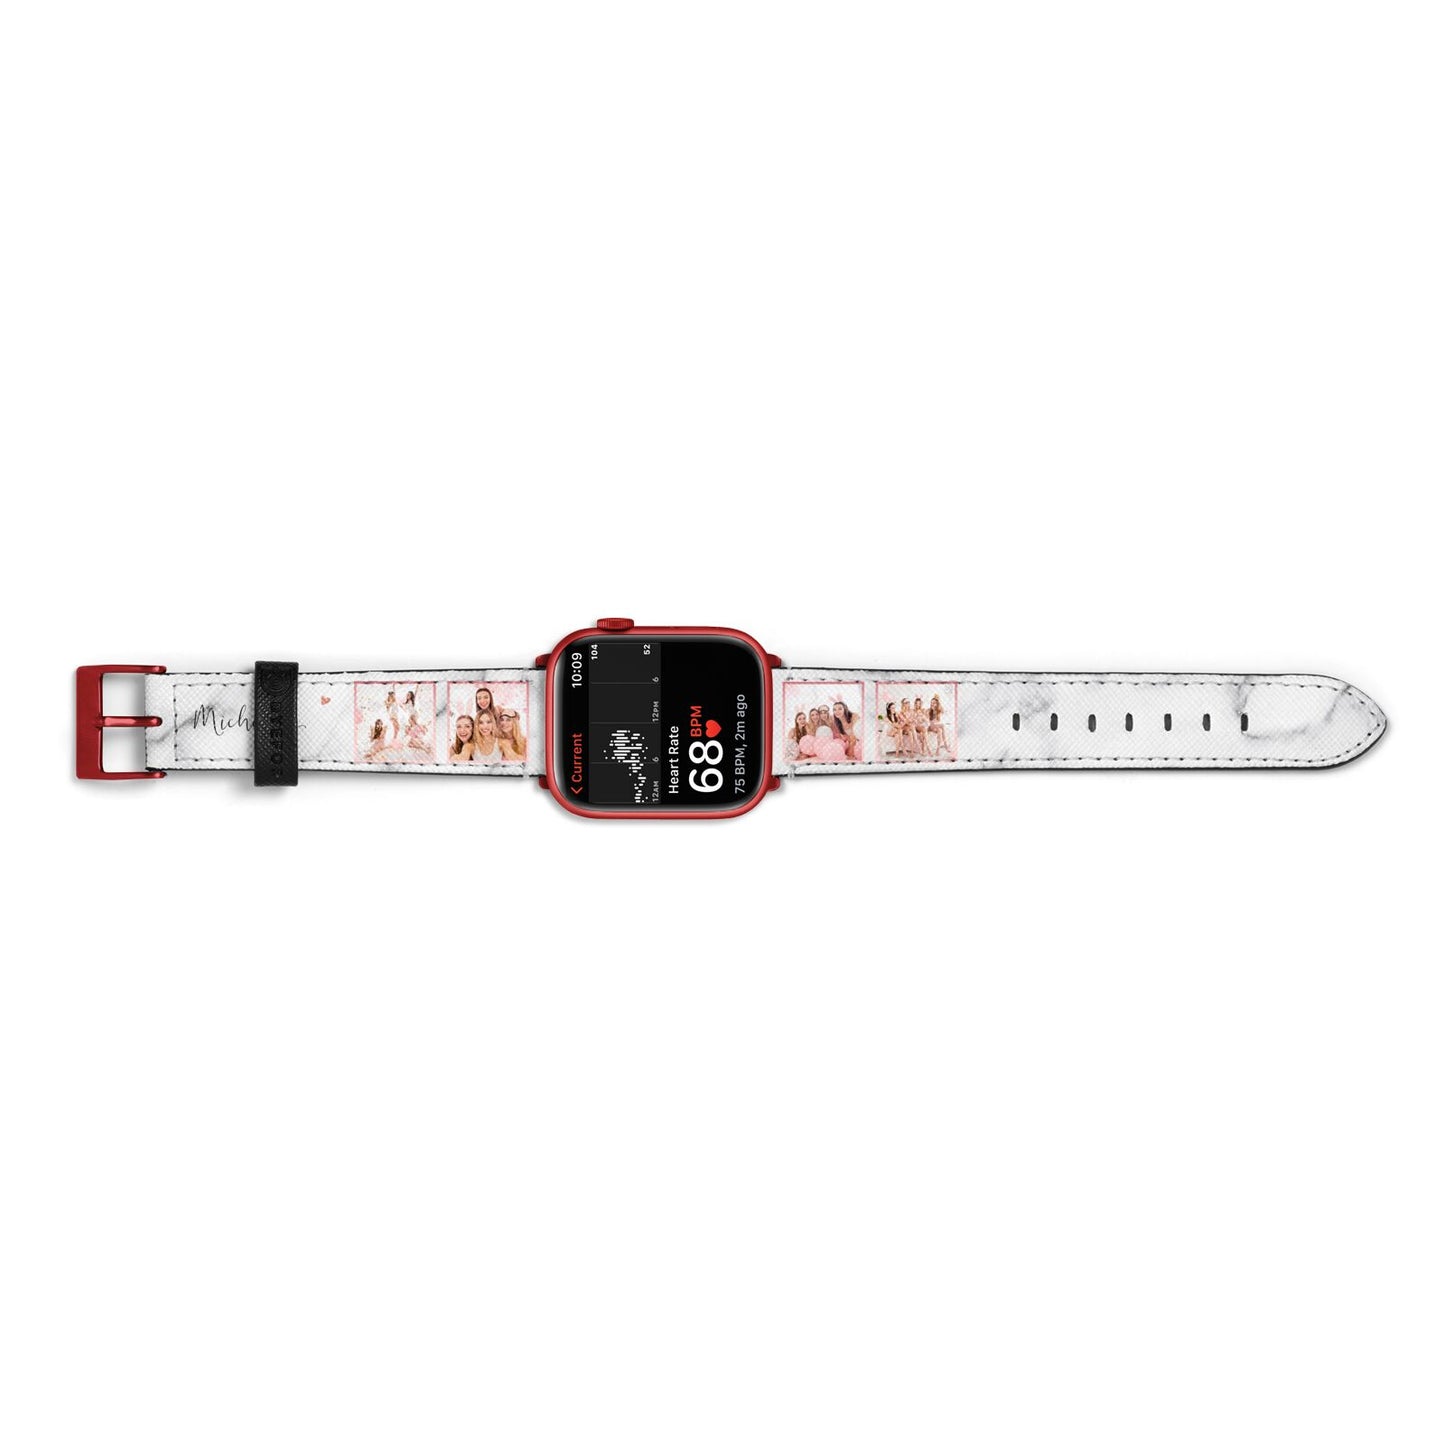 Marble Photo Strip Personalised Apple Watch Strap Size 38mm Landscape Image Red Hardware